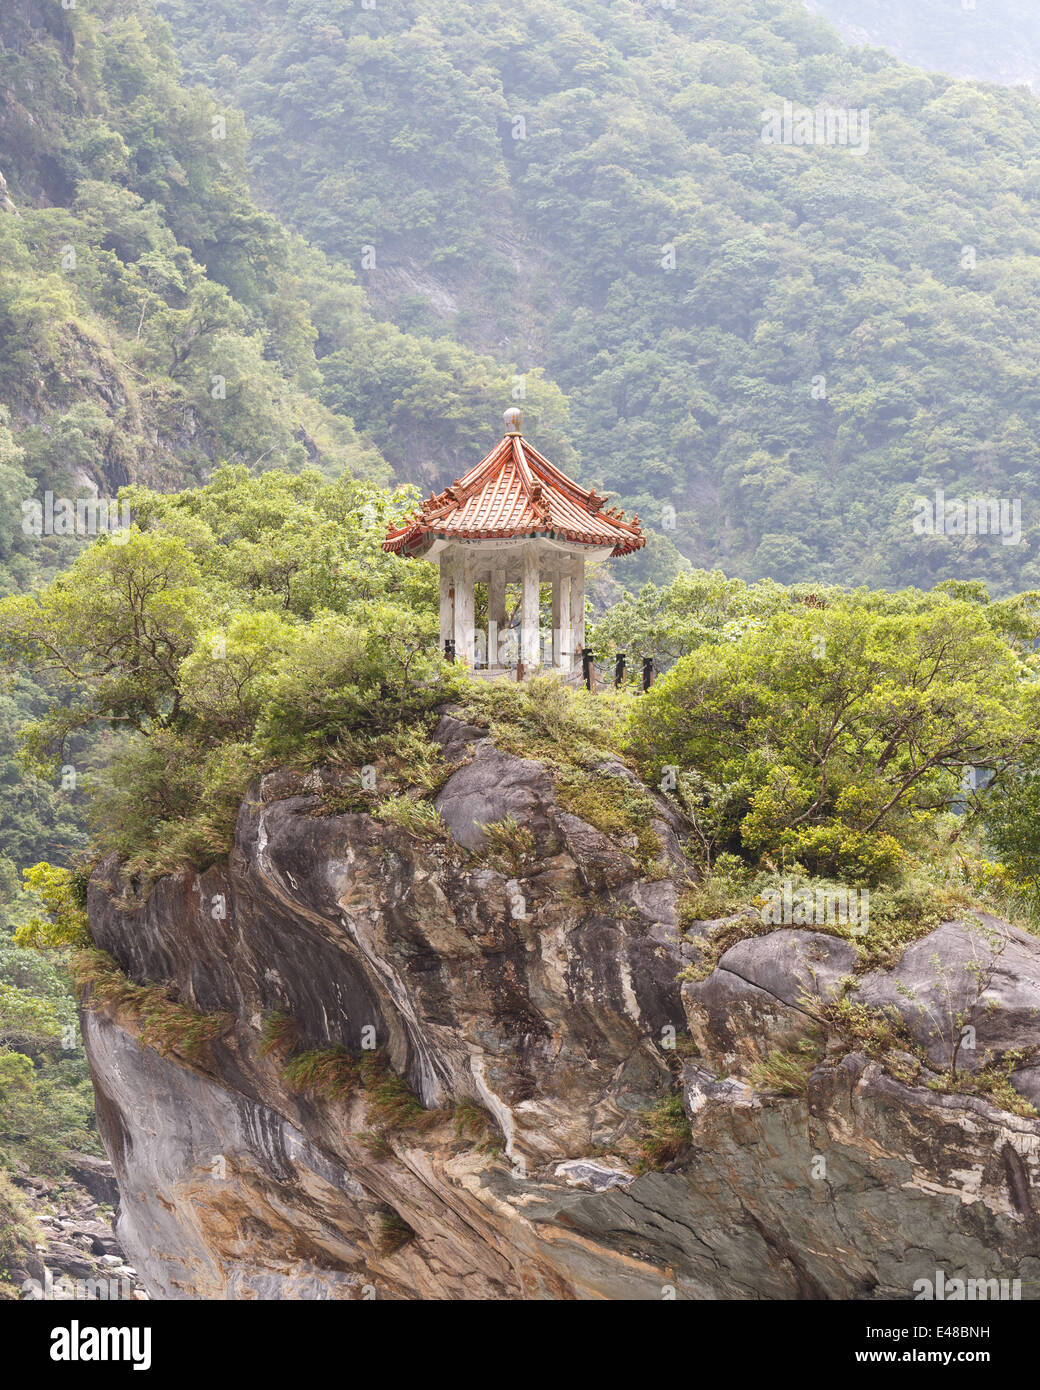 Small traditional Chinese pavilion perched atop a cliff in the mountains of Taroko National Park, Taiwan. Stock Photo